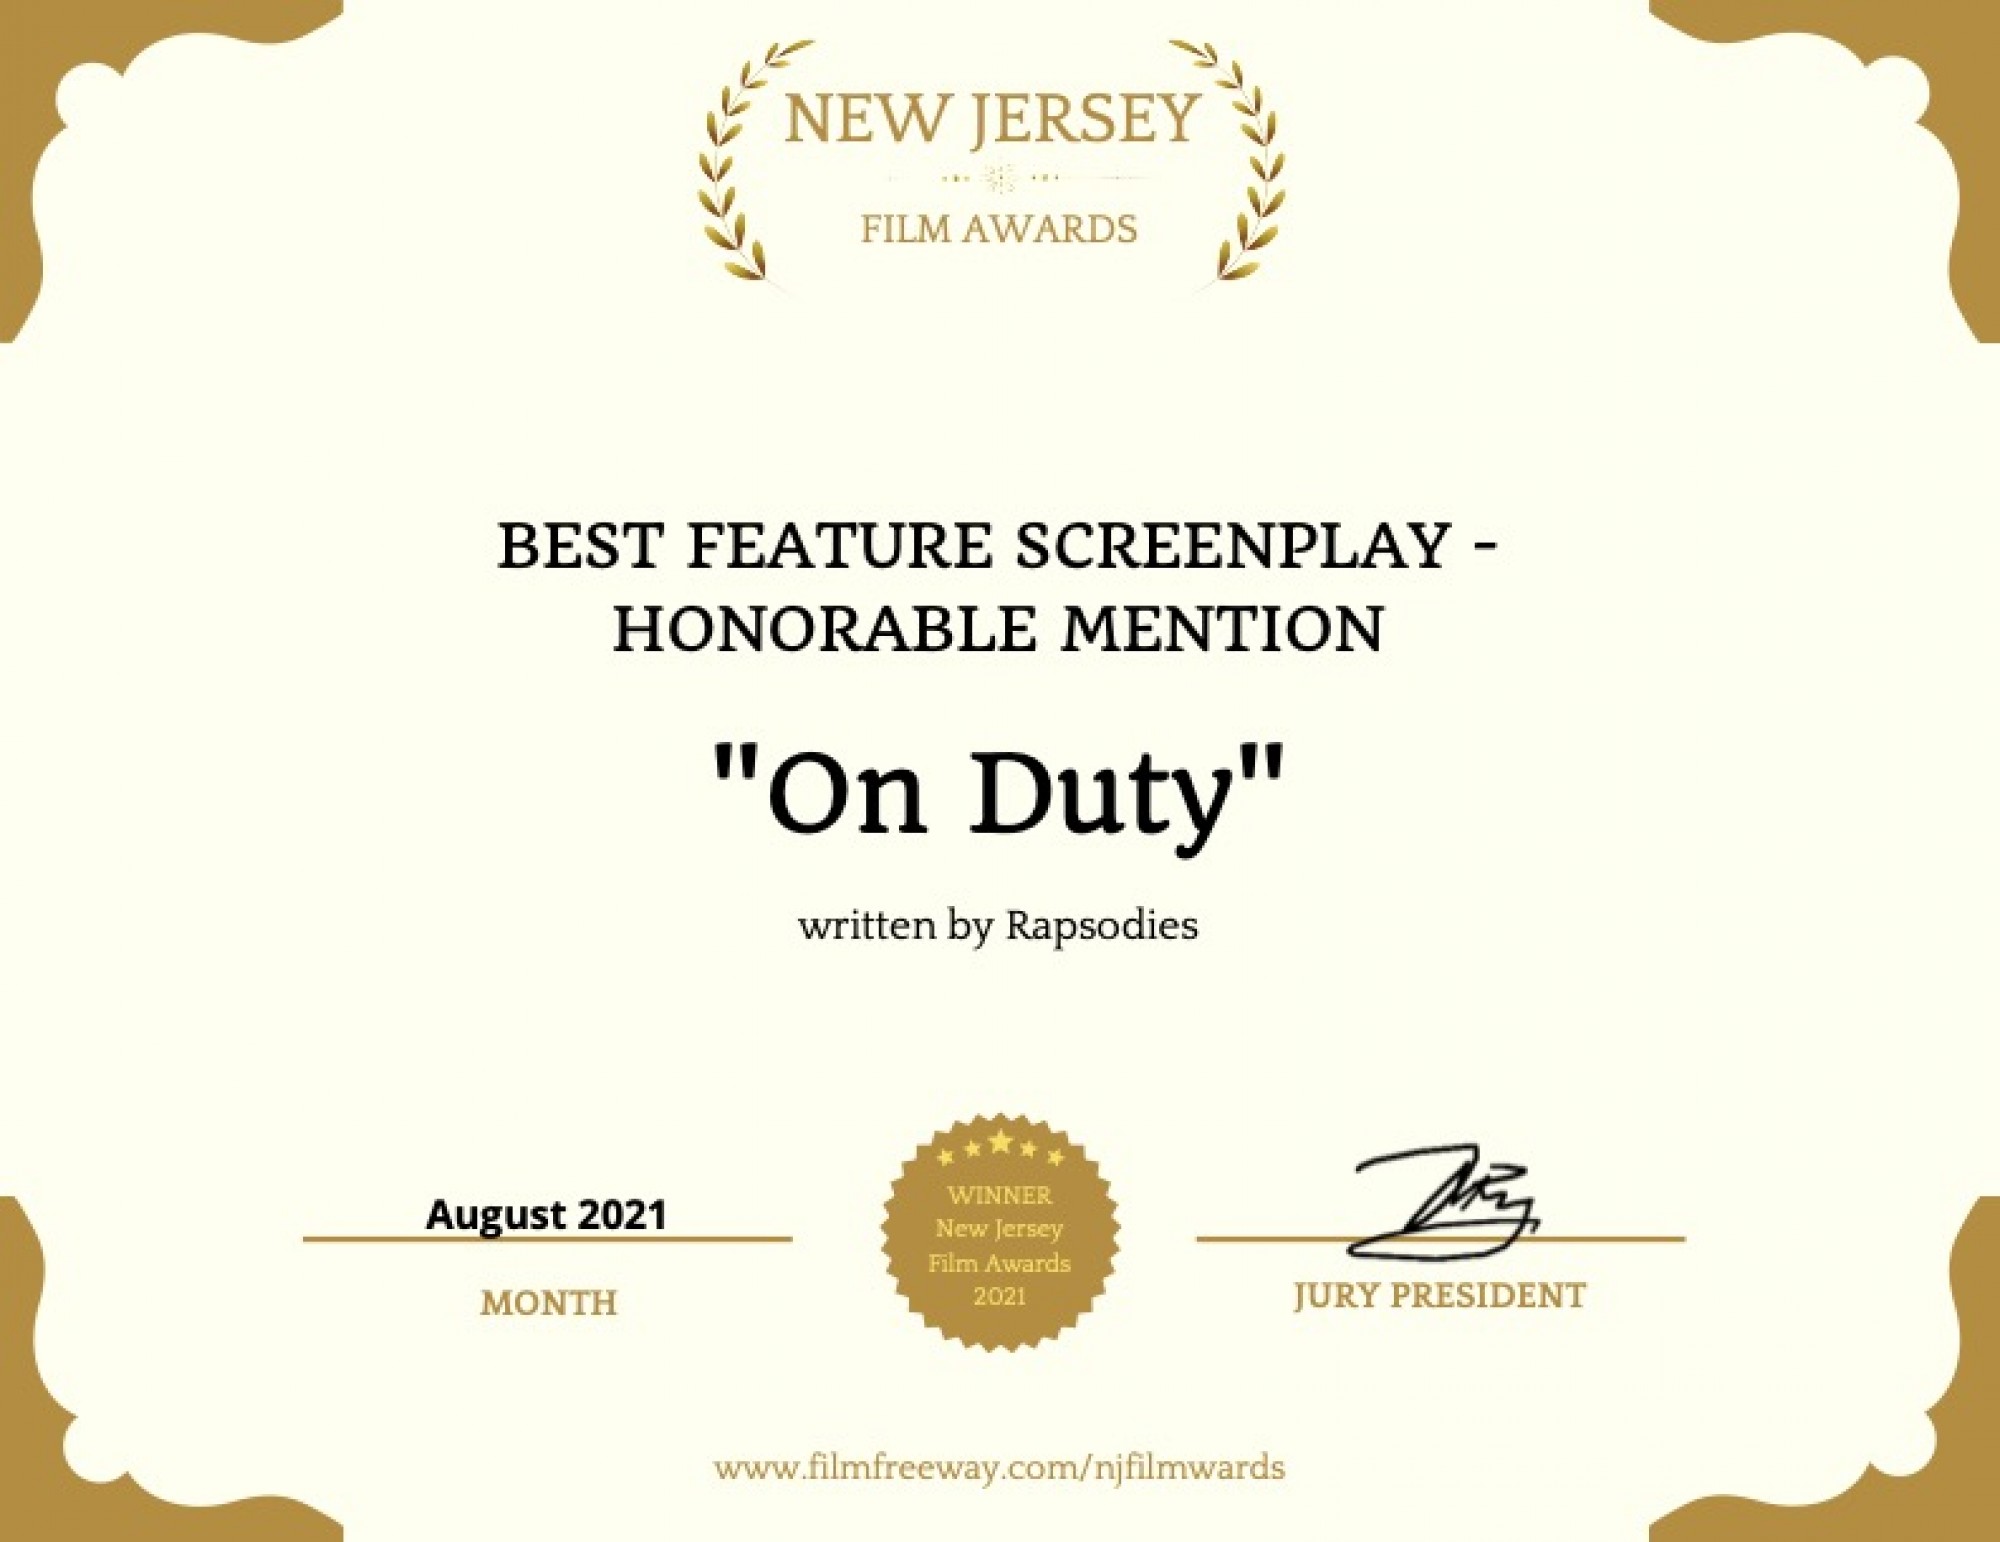 On Duty - Best Feature Screenplay - Honorable Mention